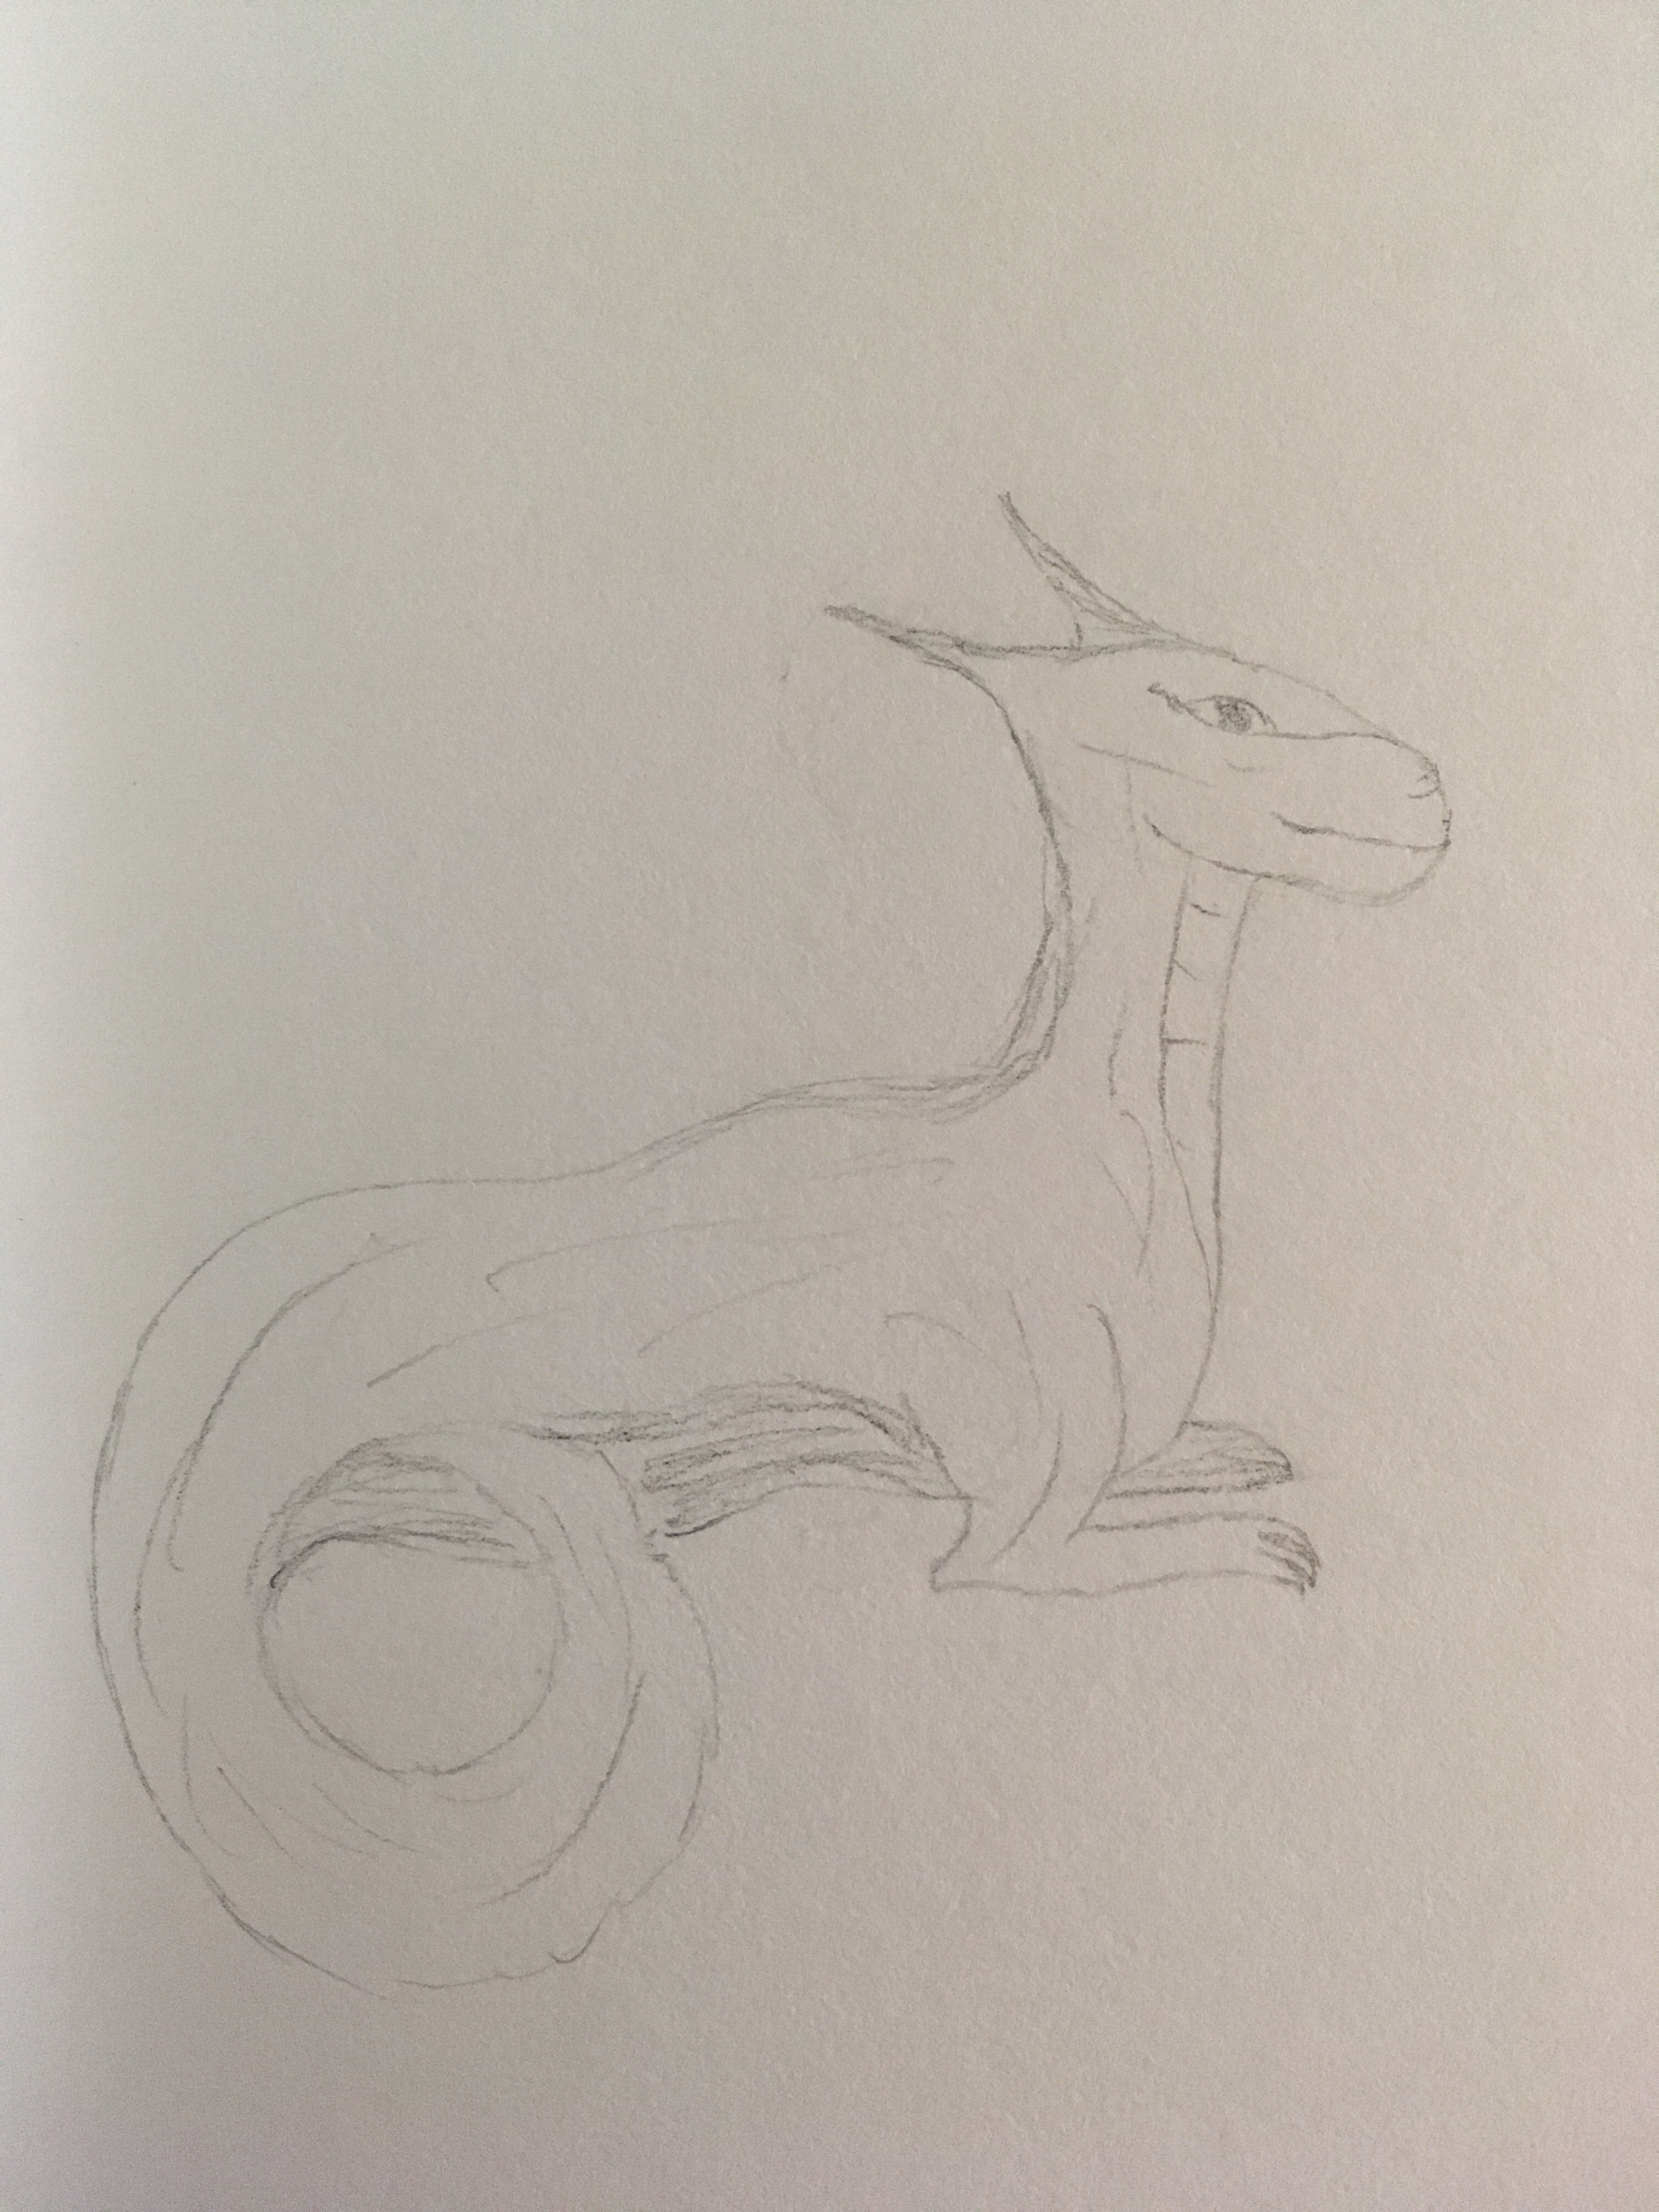 Dragon sitting staring off into distance in pencil